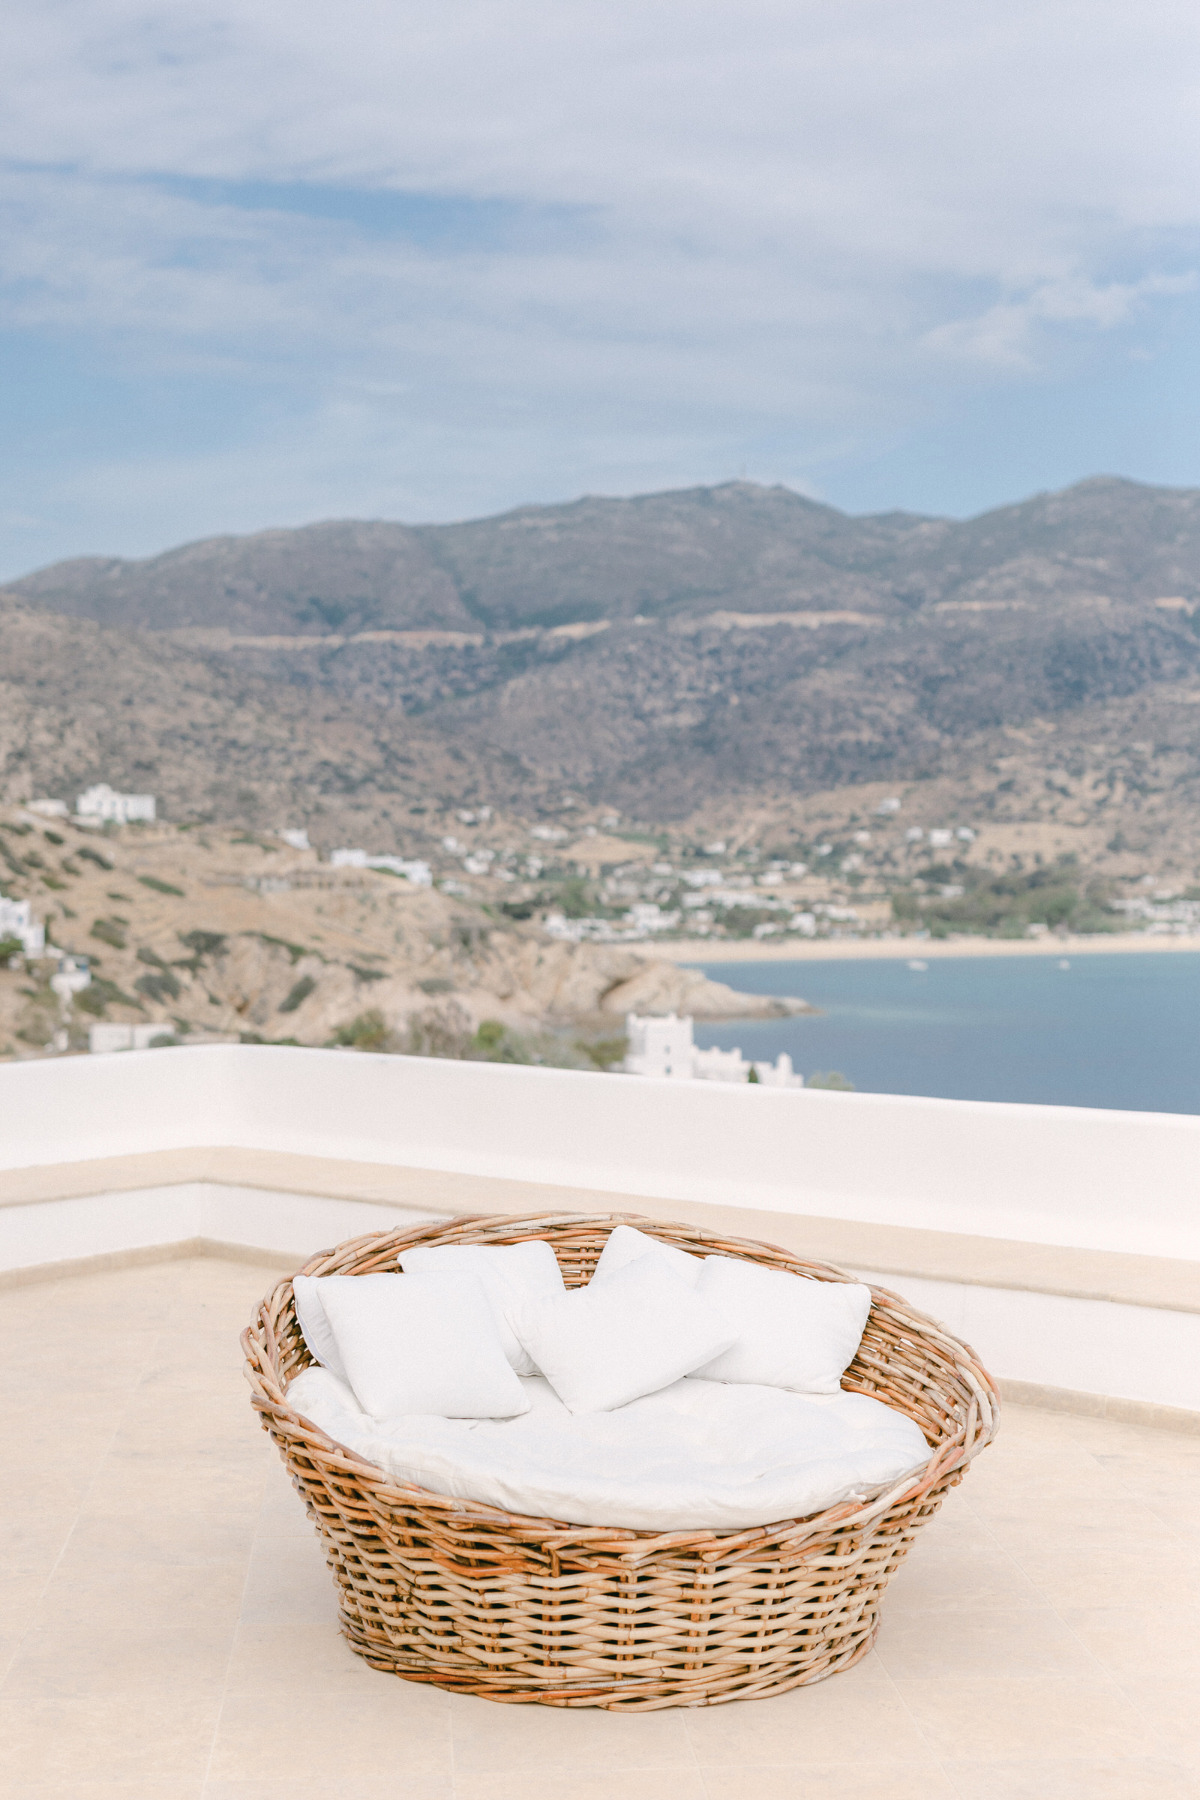 Dreamy Destination Wedding In Greece With Cliffside Views That Will Blow Your Mind